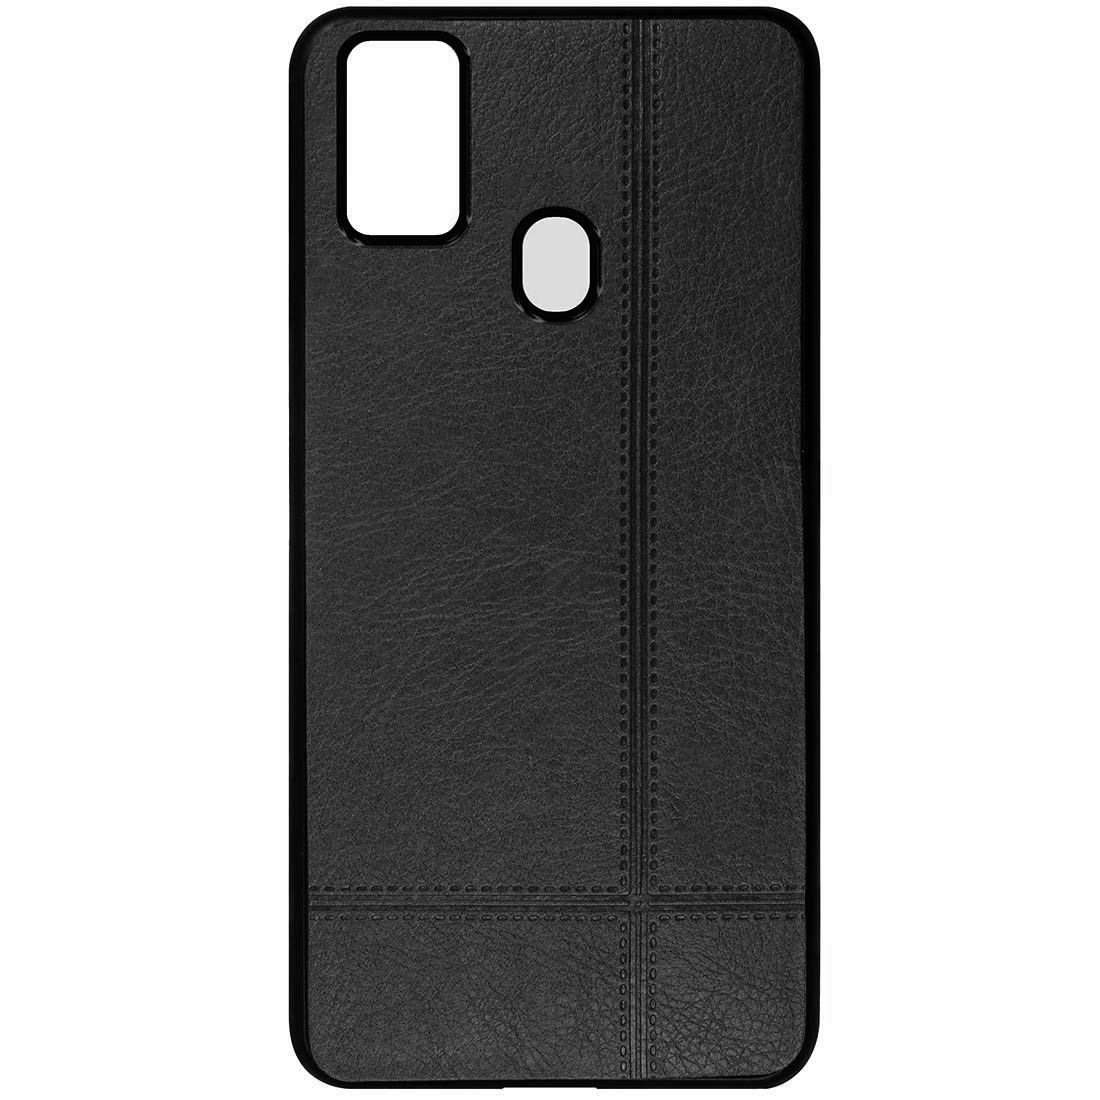 Leather TPU Back Cover for Samsung Galaxy M31 Prime / M31 / F41